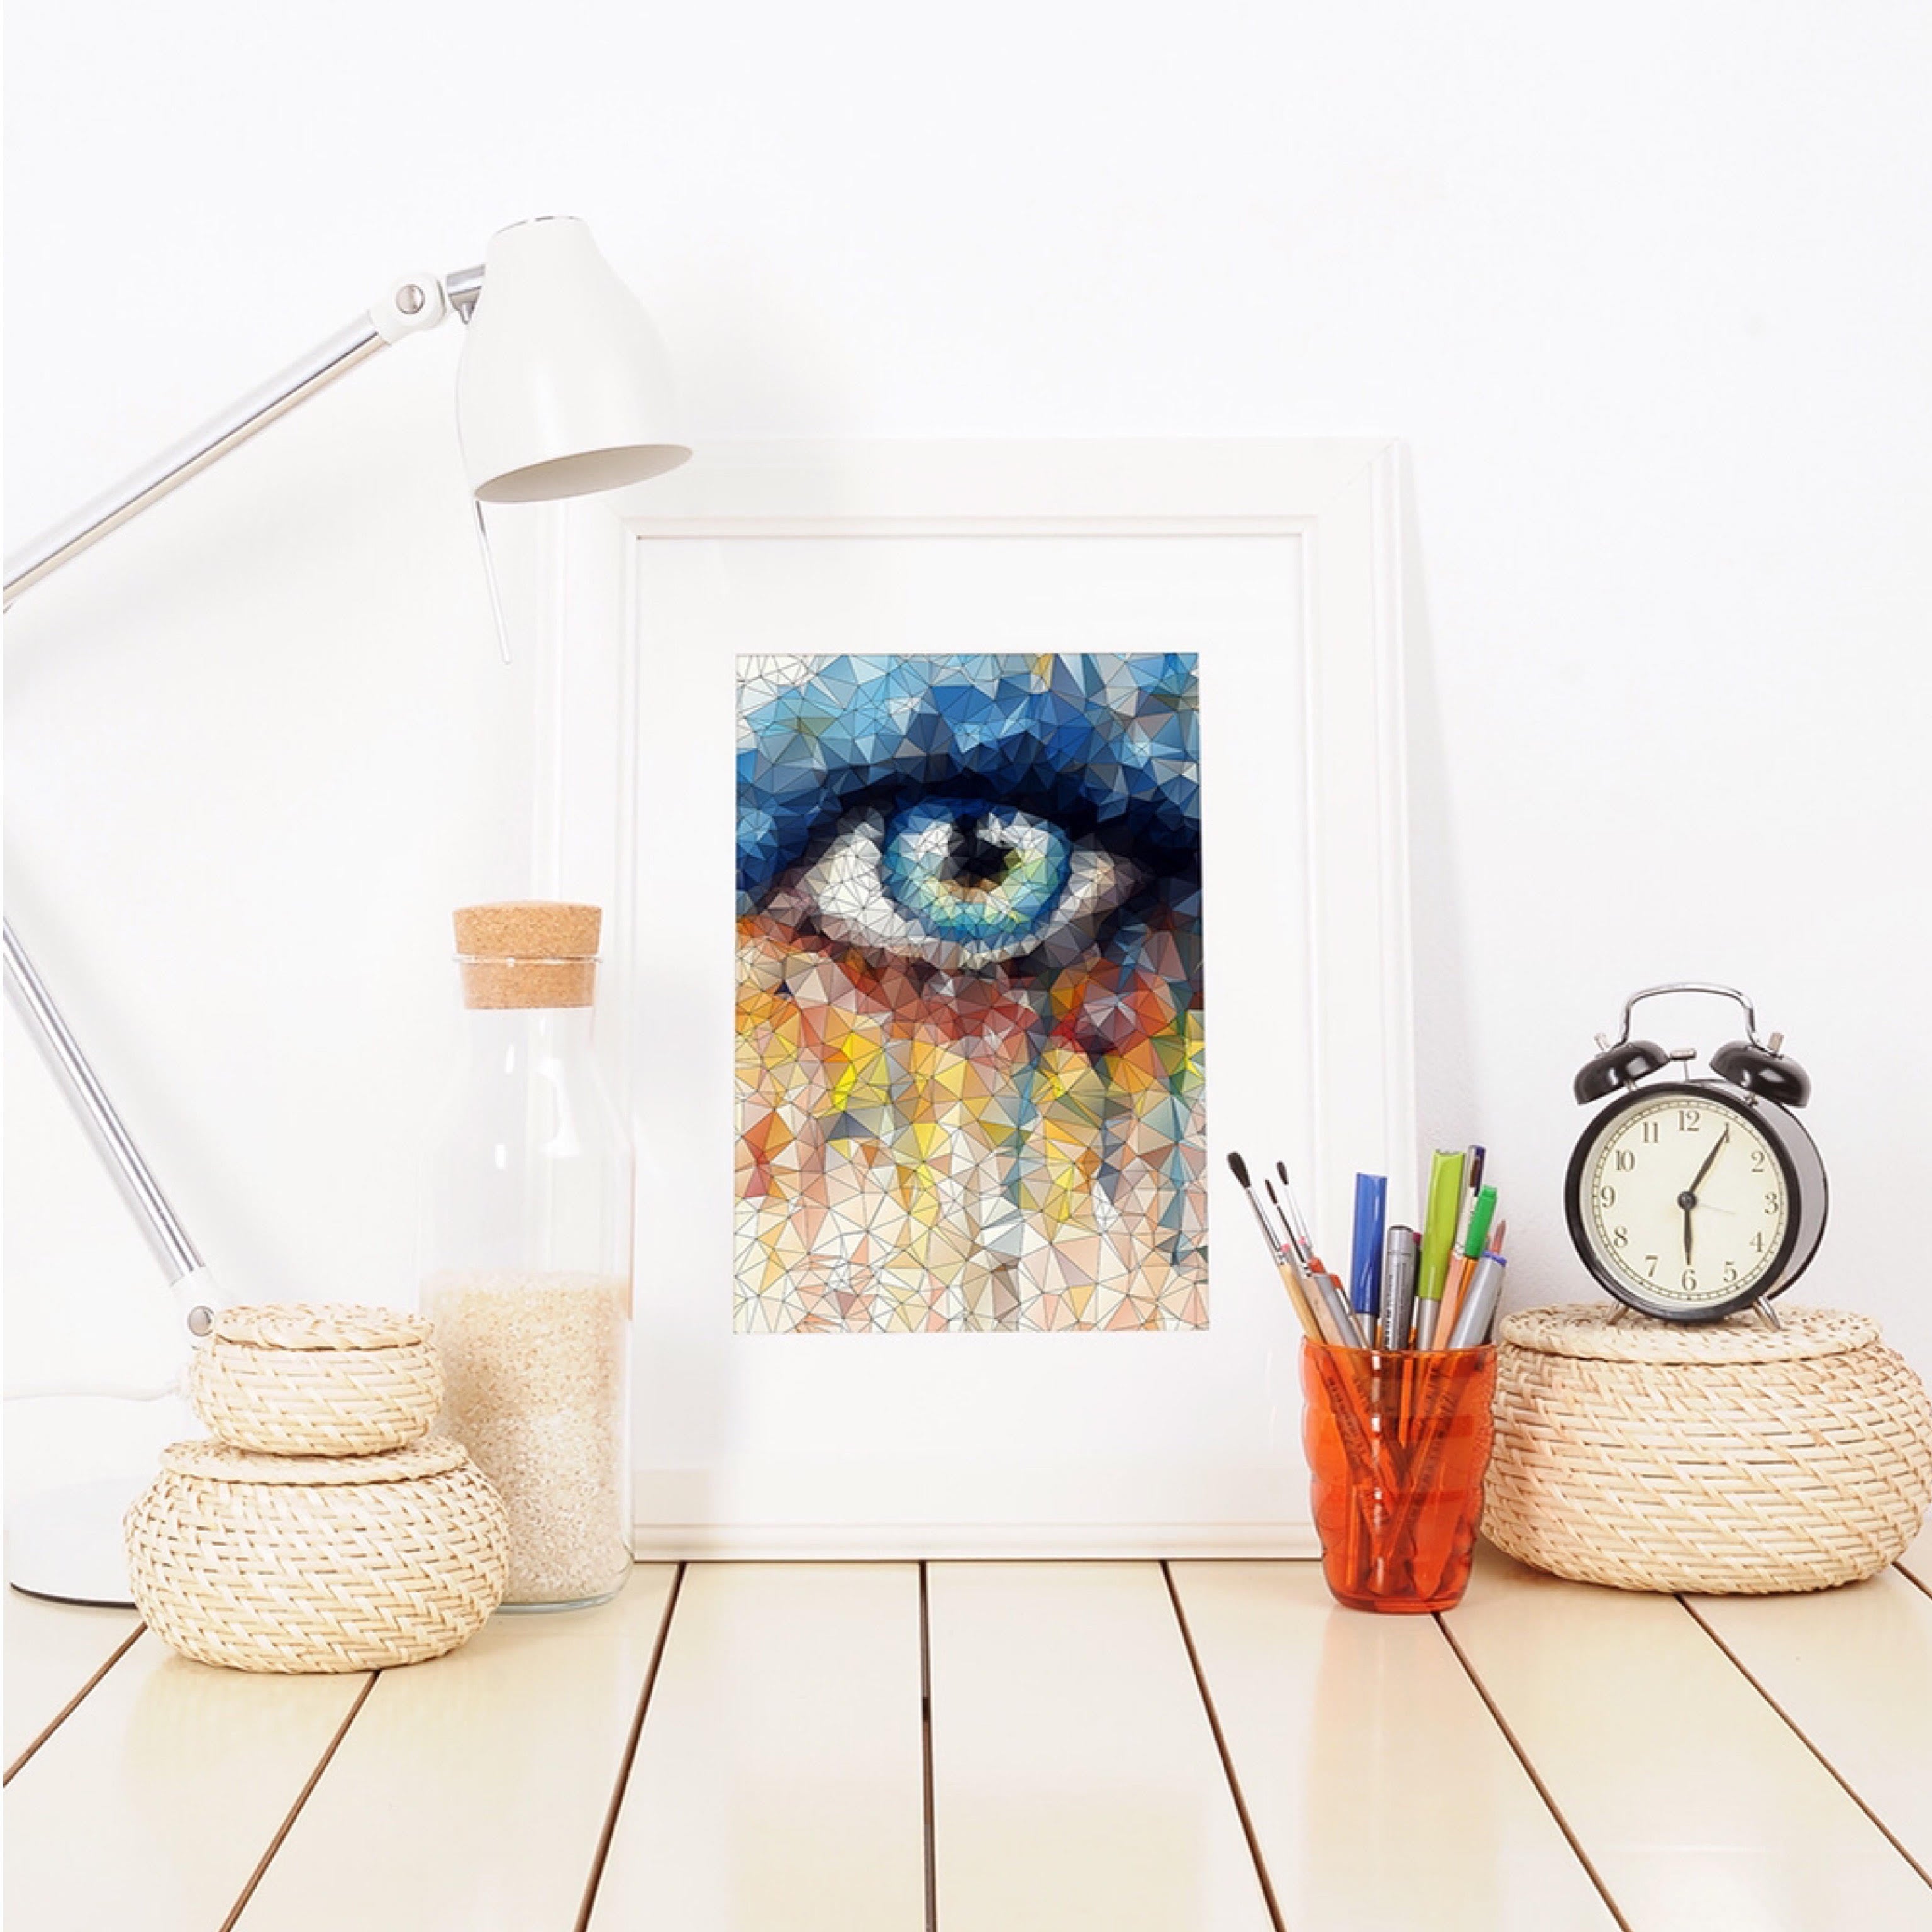 Eye See You Print ARtscapes-AR - ARtscapes